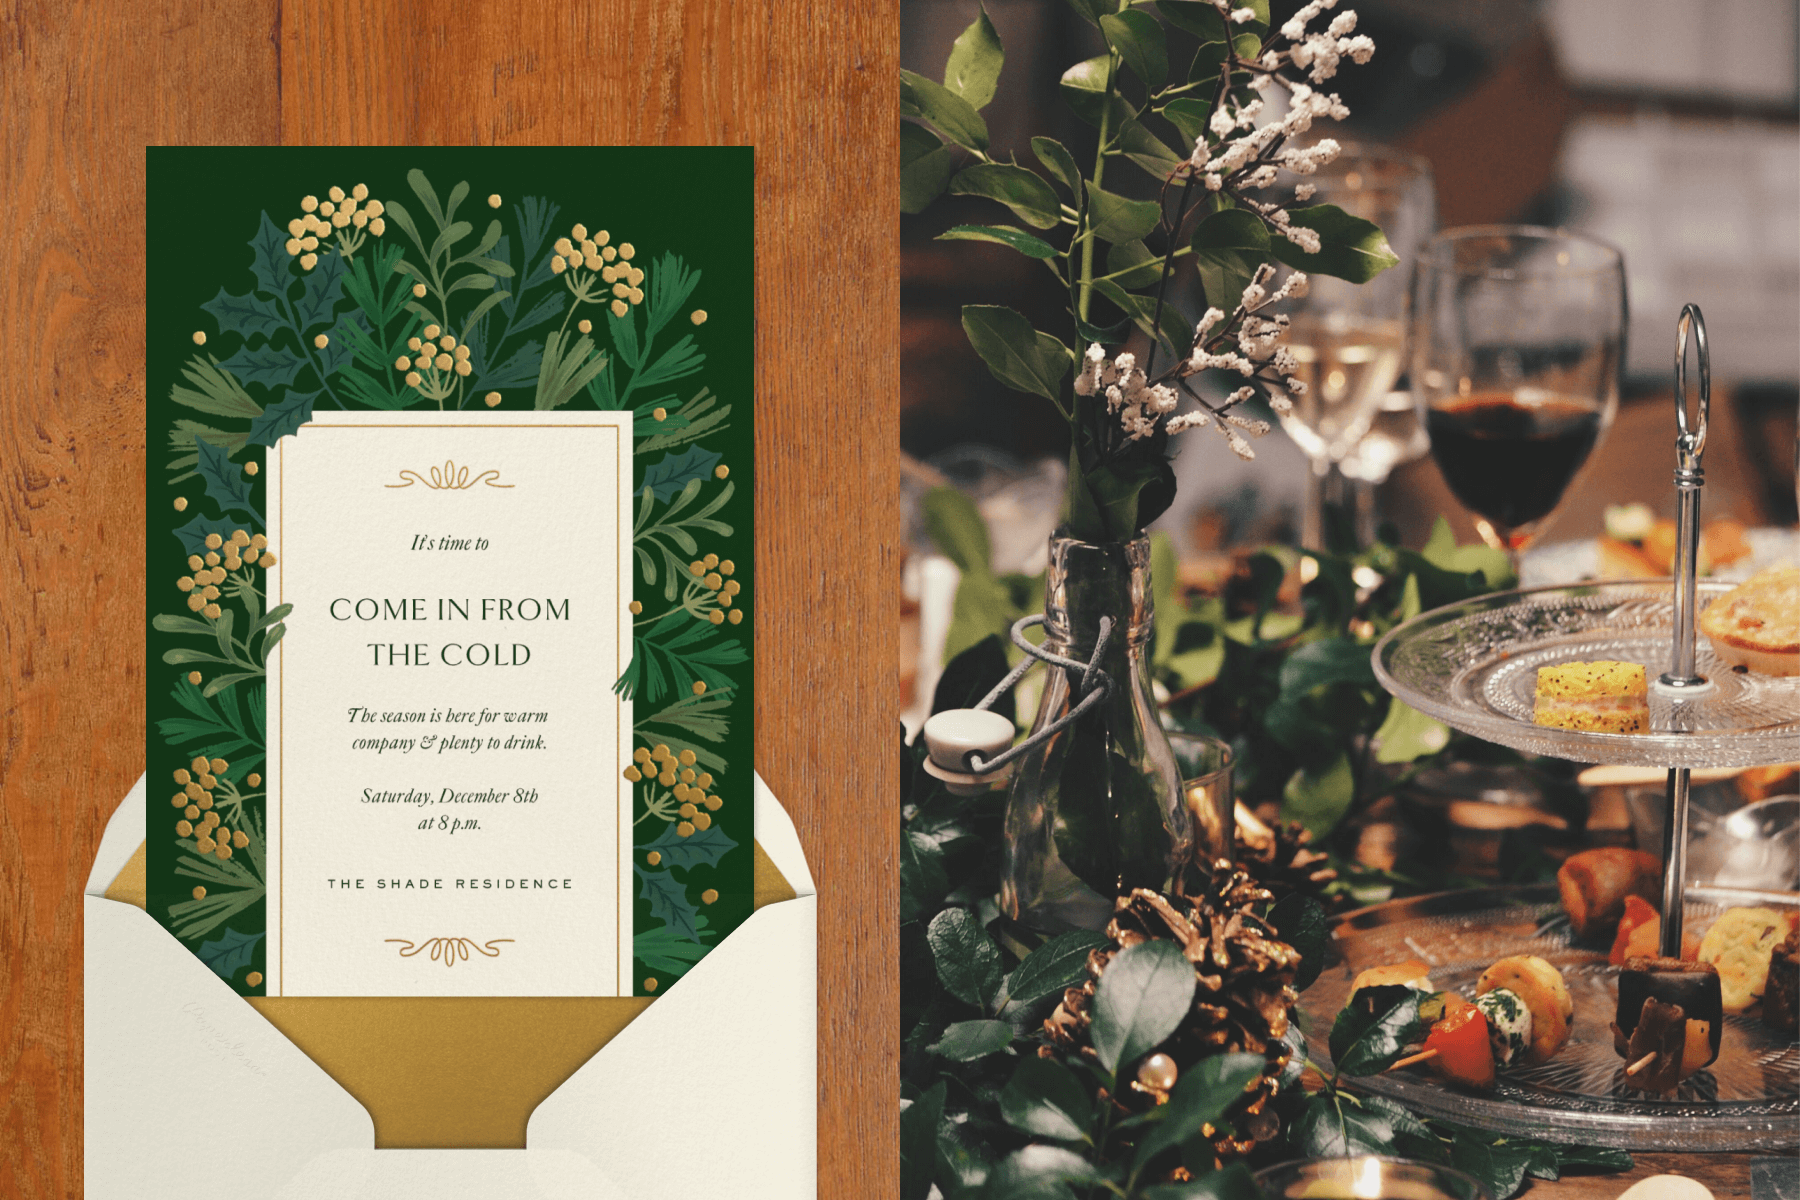 Left: A holiday party invitation with a winter berry illustration. Right: A decorated holiday table.